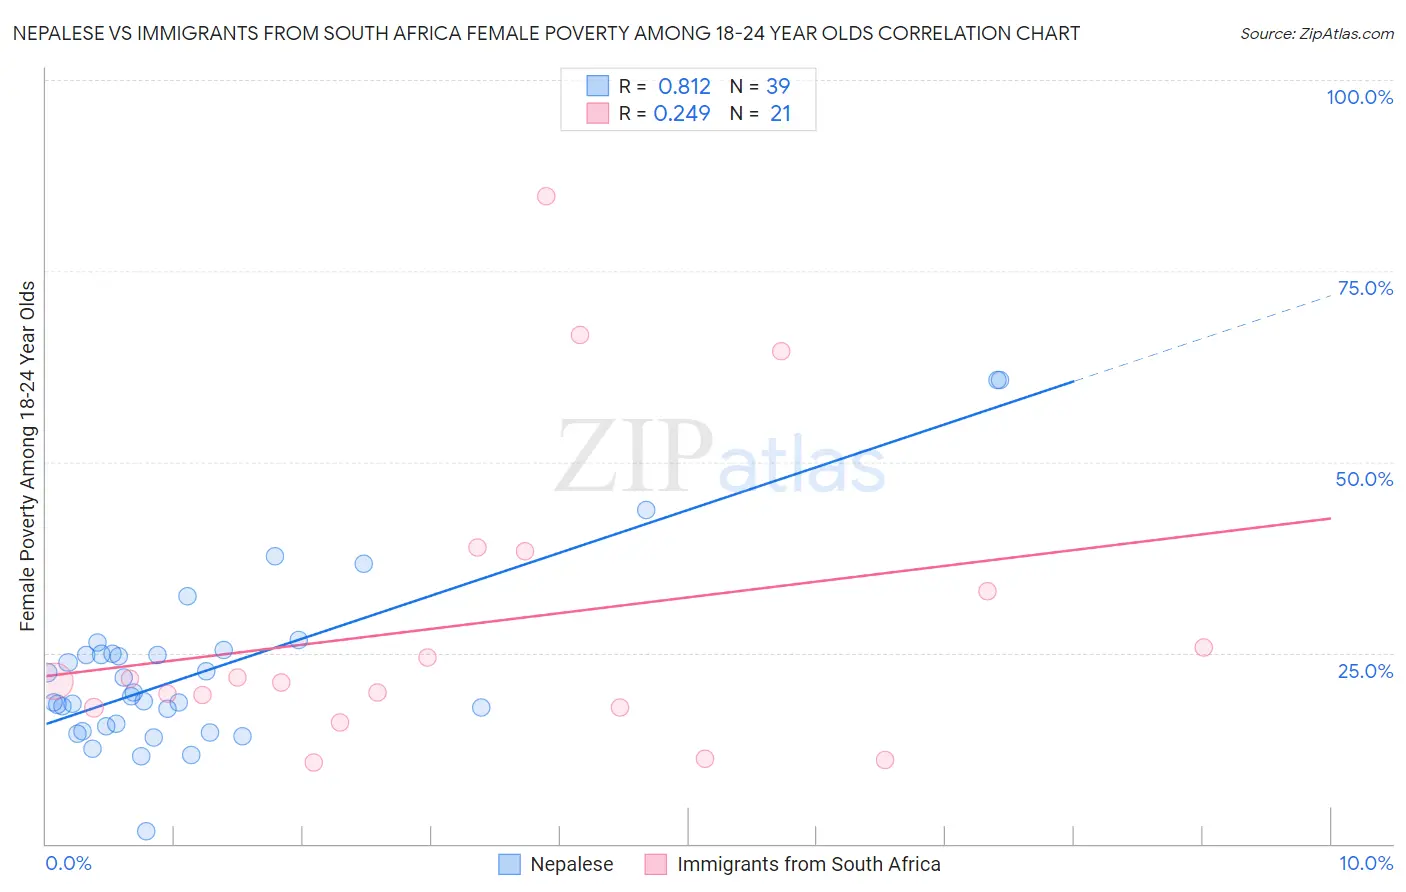 Nepalese vs Immigrants from South Africa Female Poverty Among 18-24 Year Olds